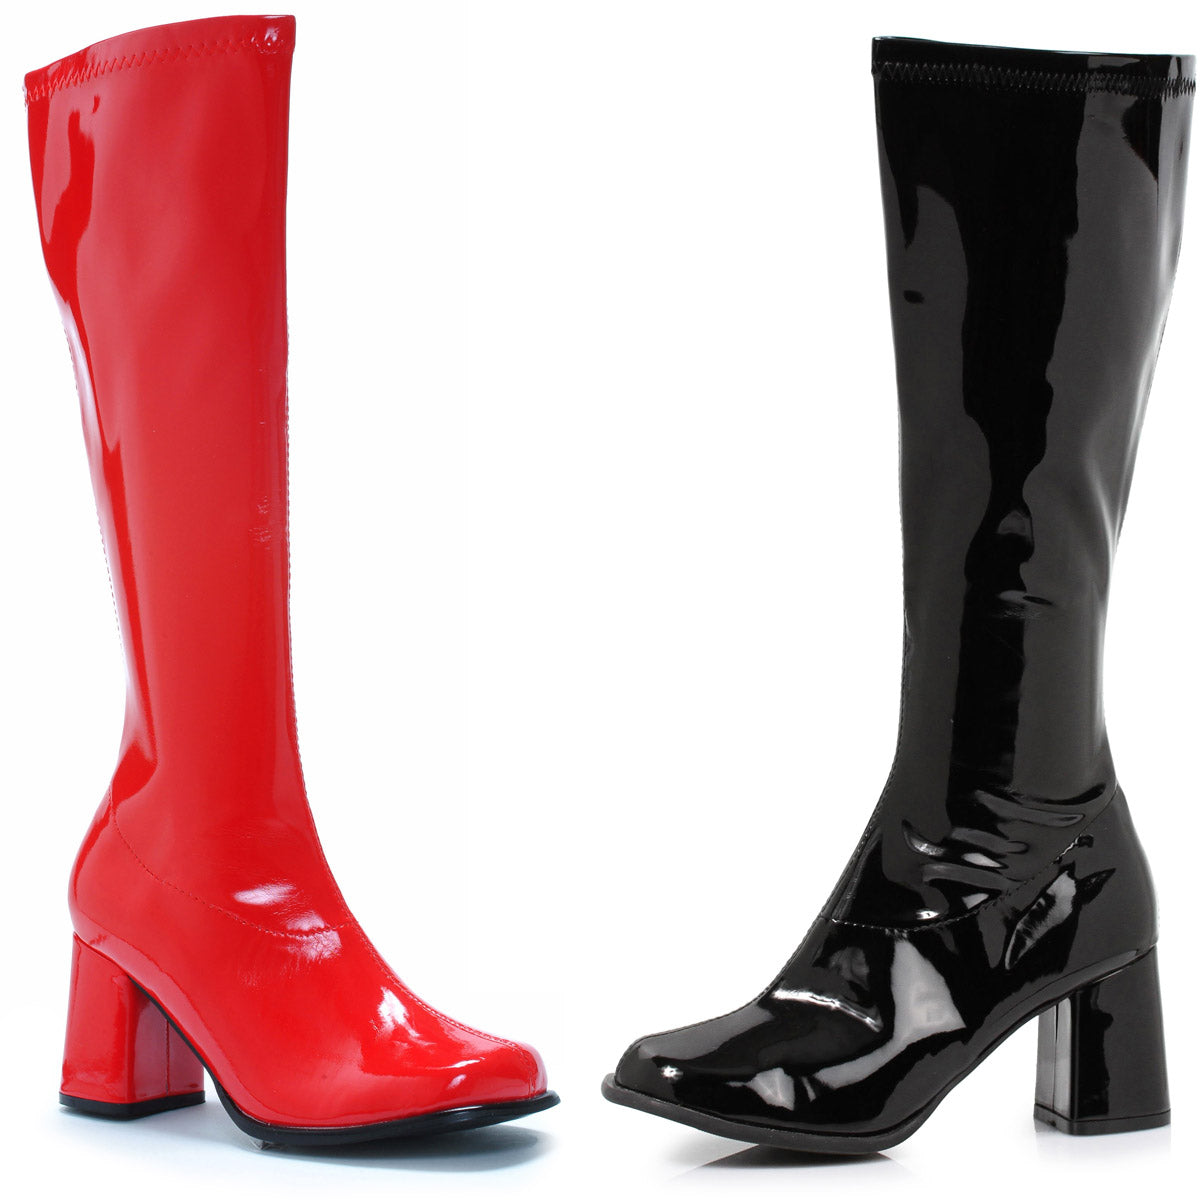 Black/red 3" Knee High Boot Shoes Boots Ellie Halloween Sexy Ellie  300/HARLEY/BLKR